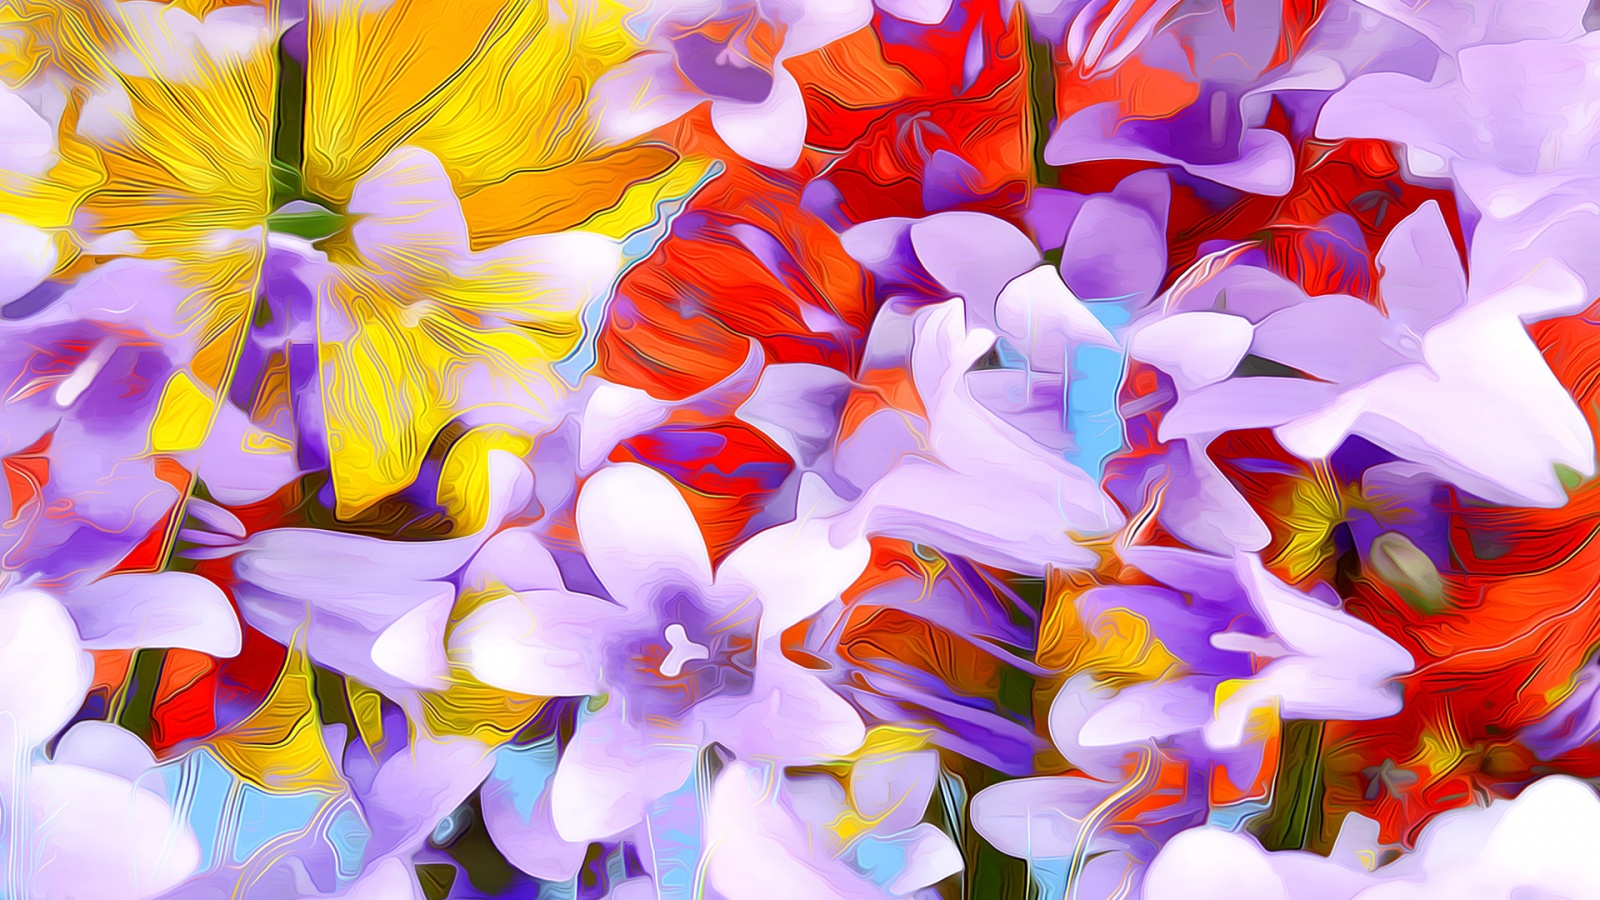 Flowers Art Abstraction (click to view) HD Wallpapers in 1600x900 Resolution